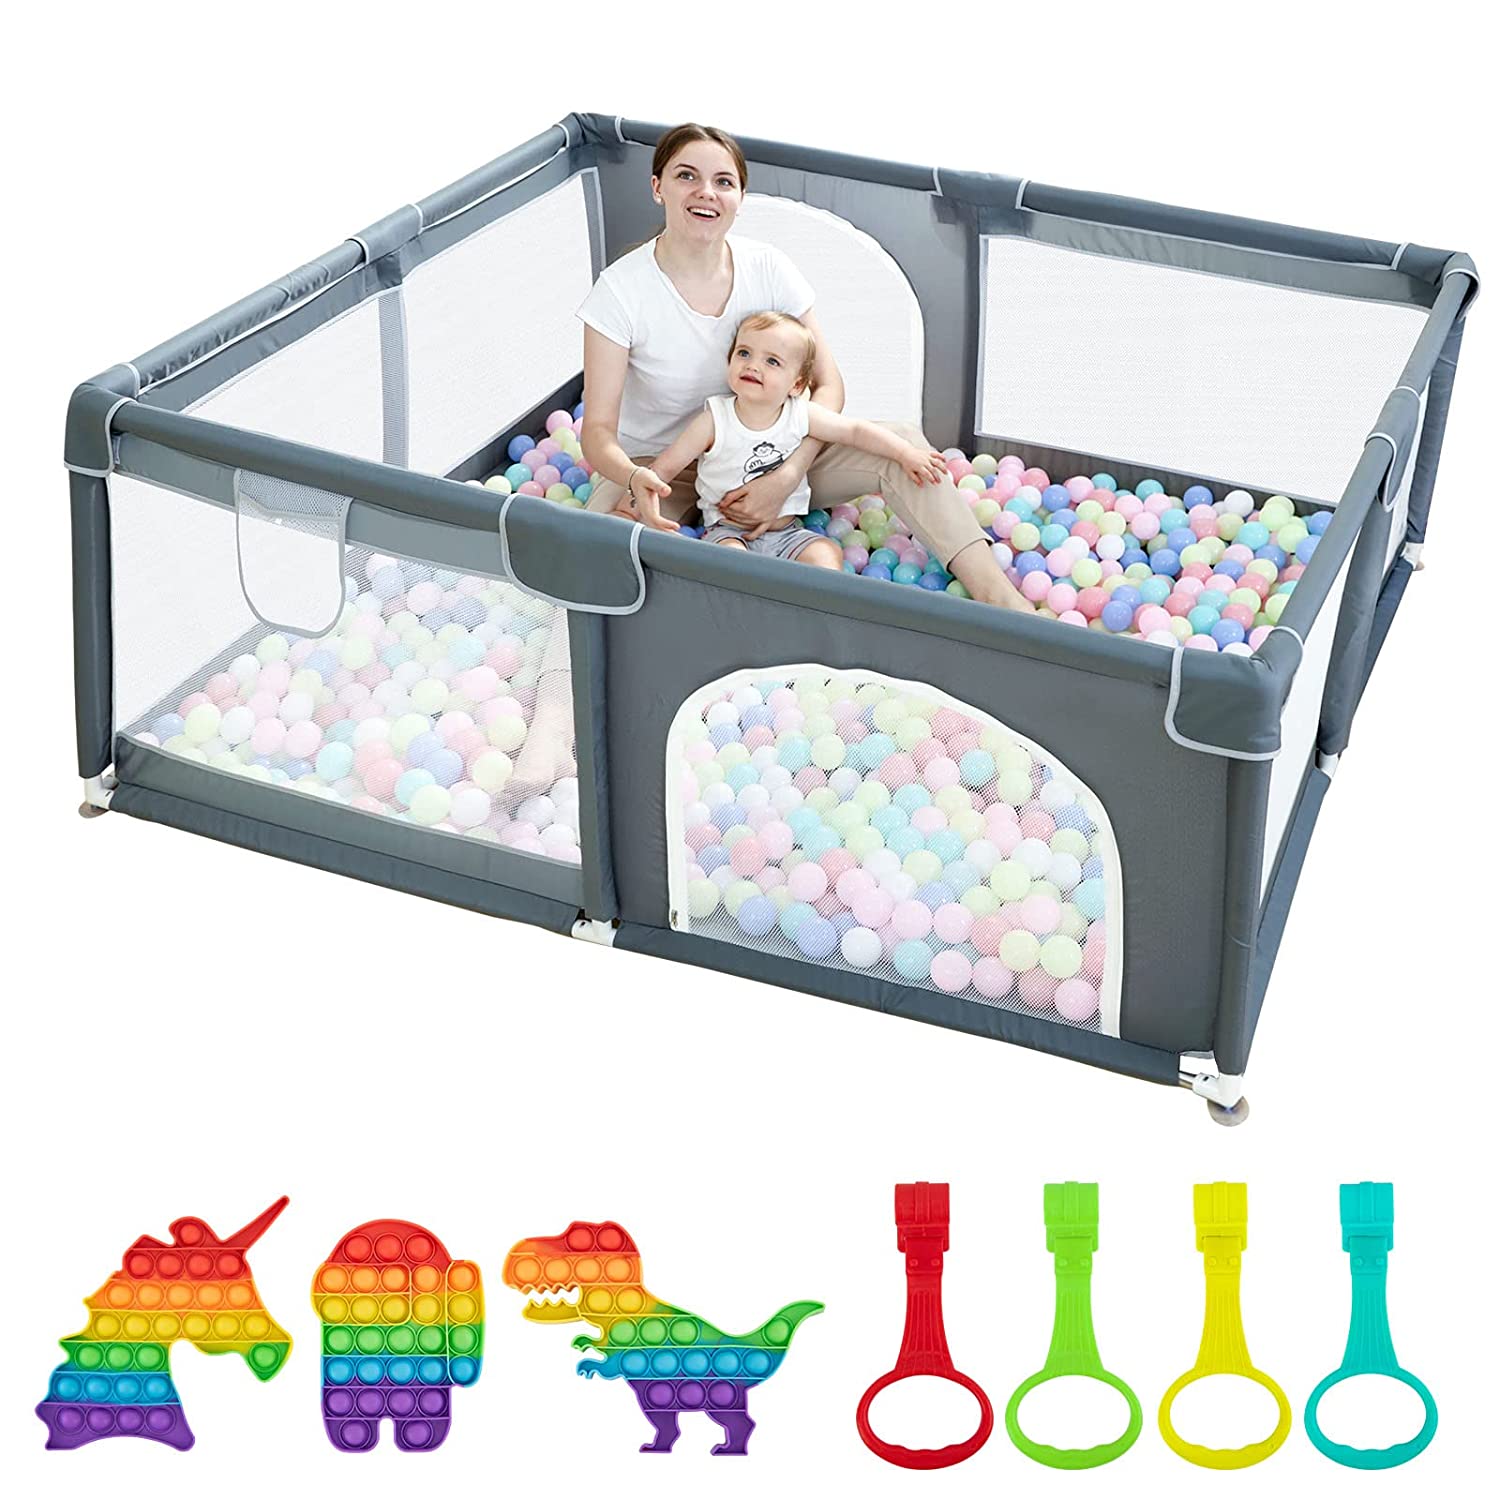 Baby Fence With Breathable Mesh, Safety Indoor & Outdoor Activity Center - Baby Care -  Trend Goods